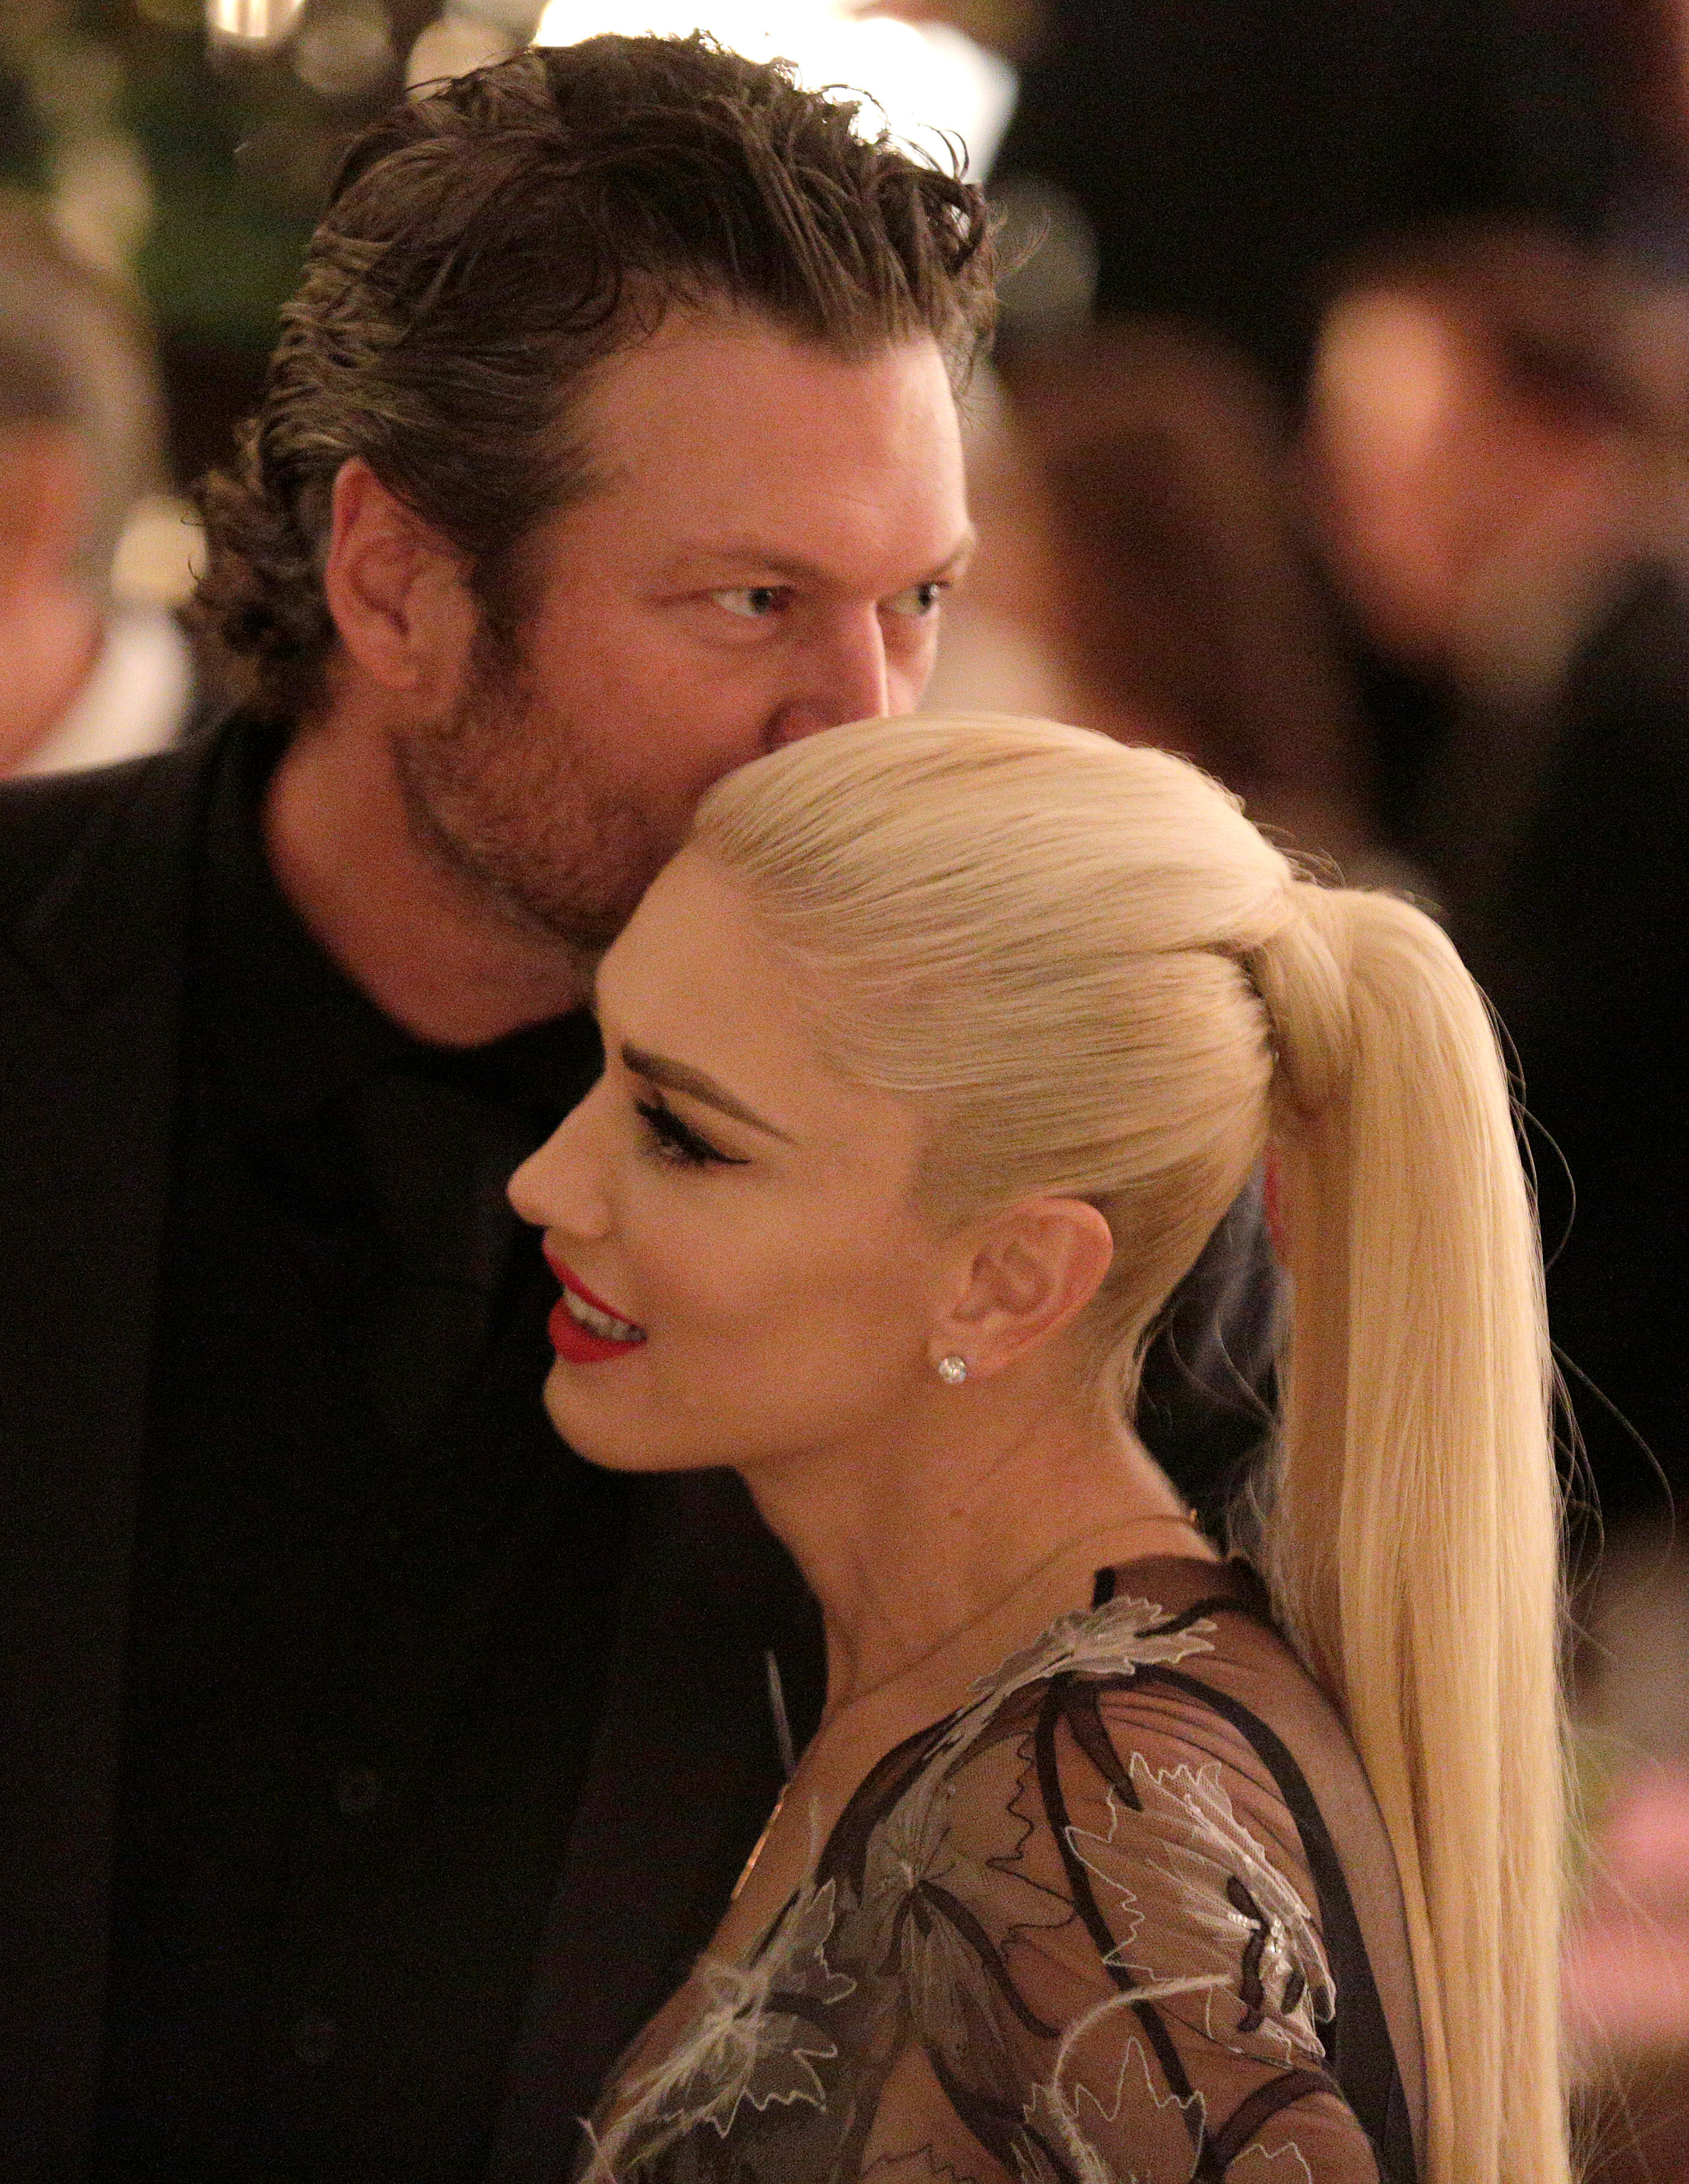 Gwen receives a kiss from Blake during a State Dinner at the White House in 2016